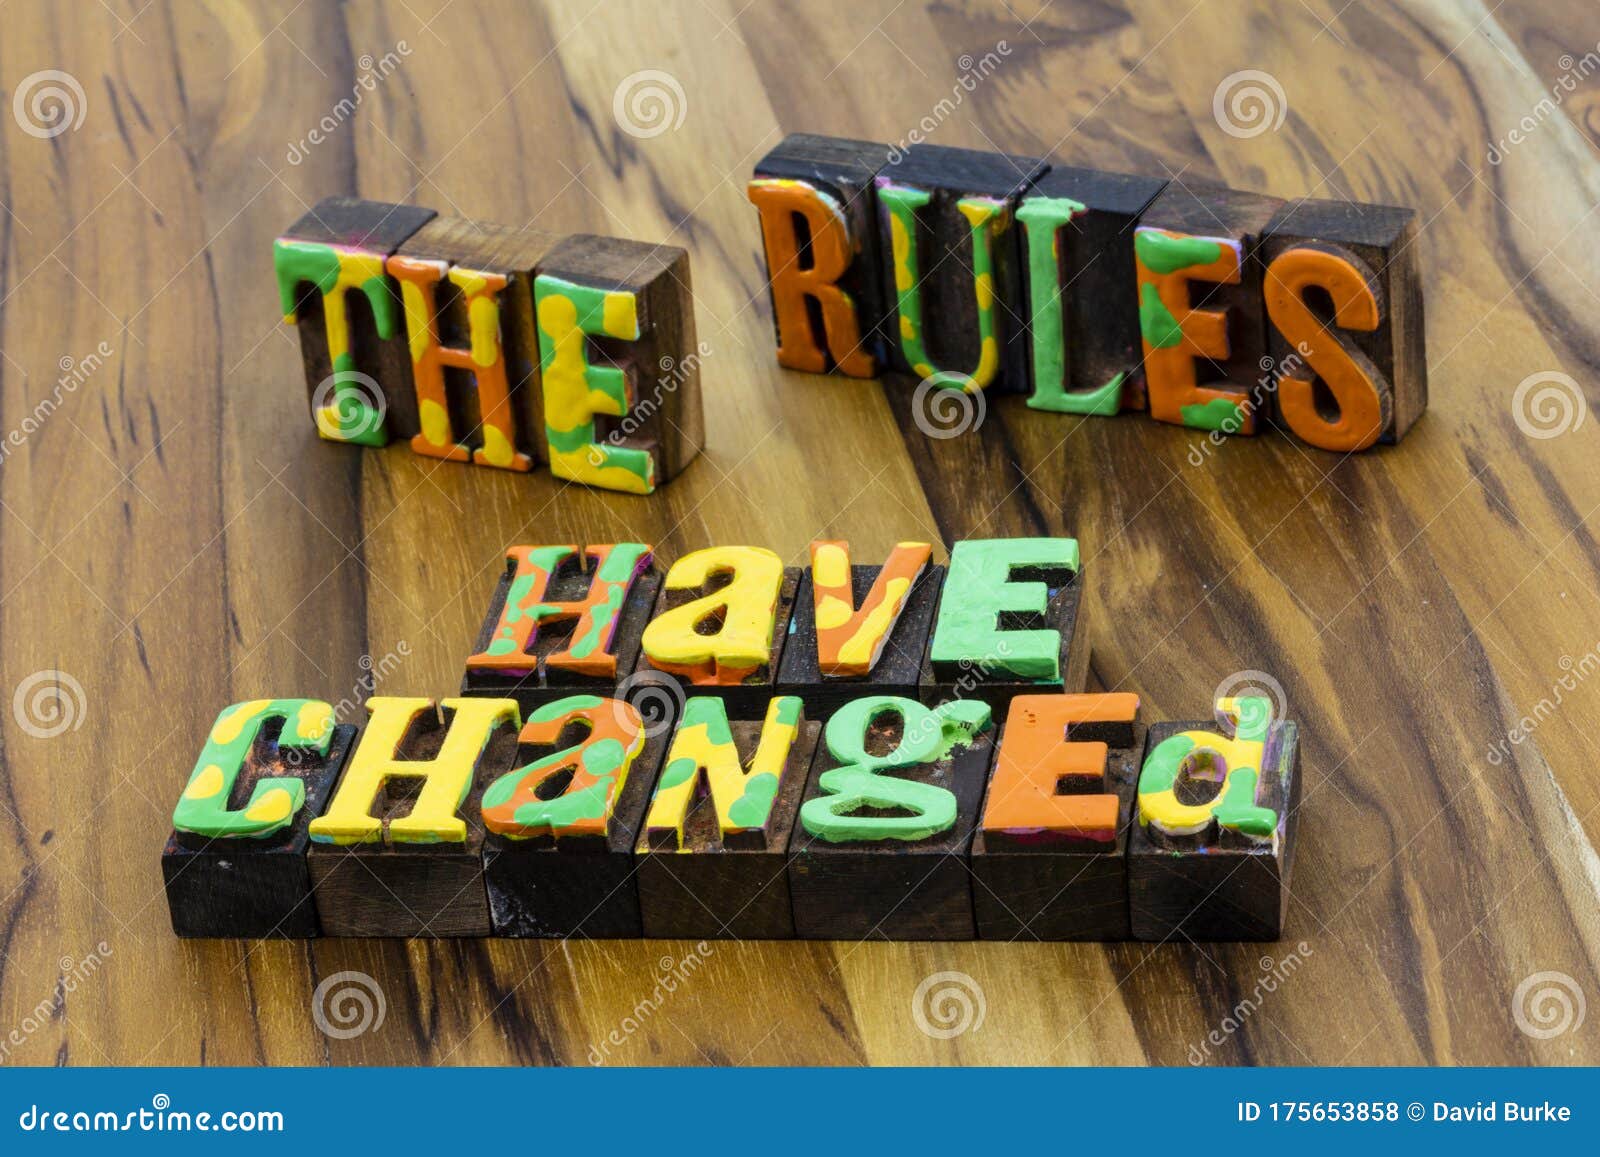 rules have changed to plan for success